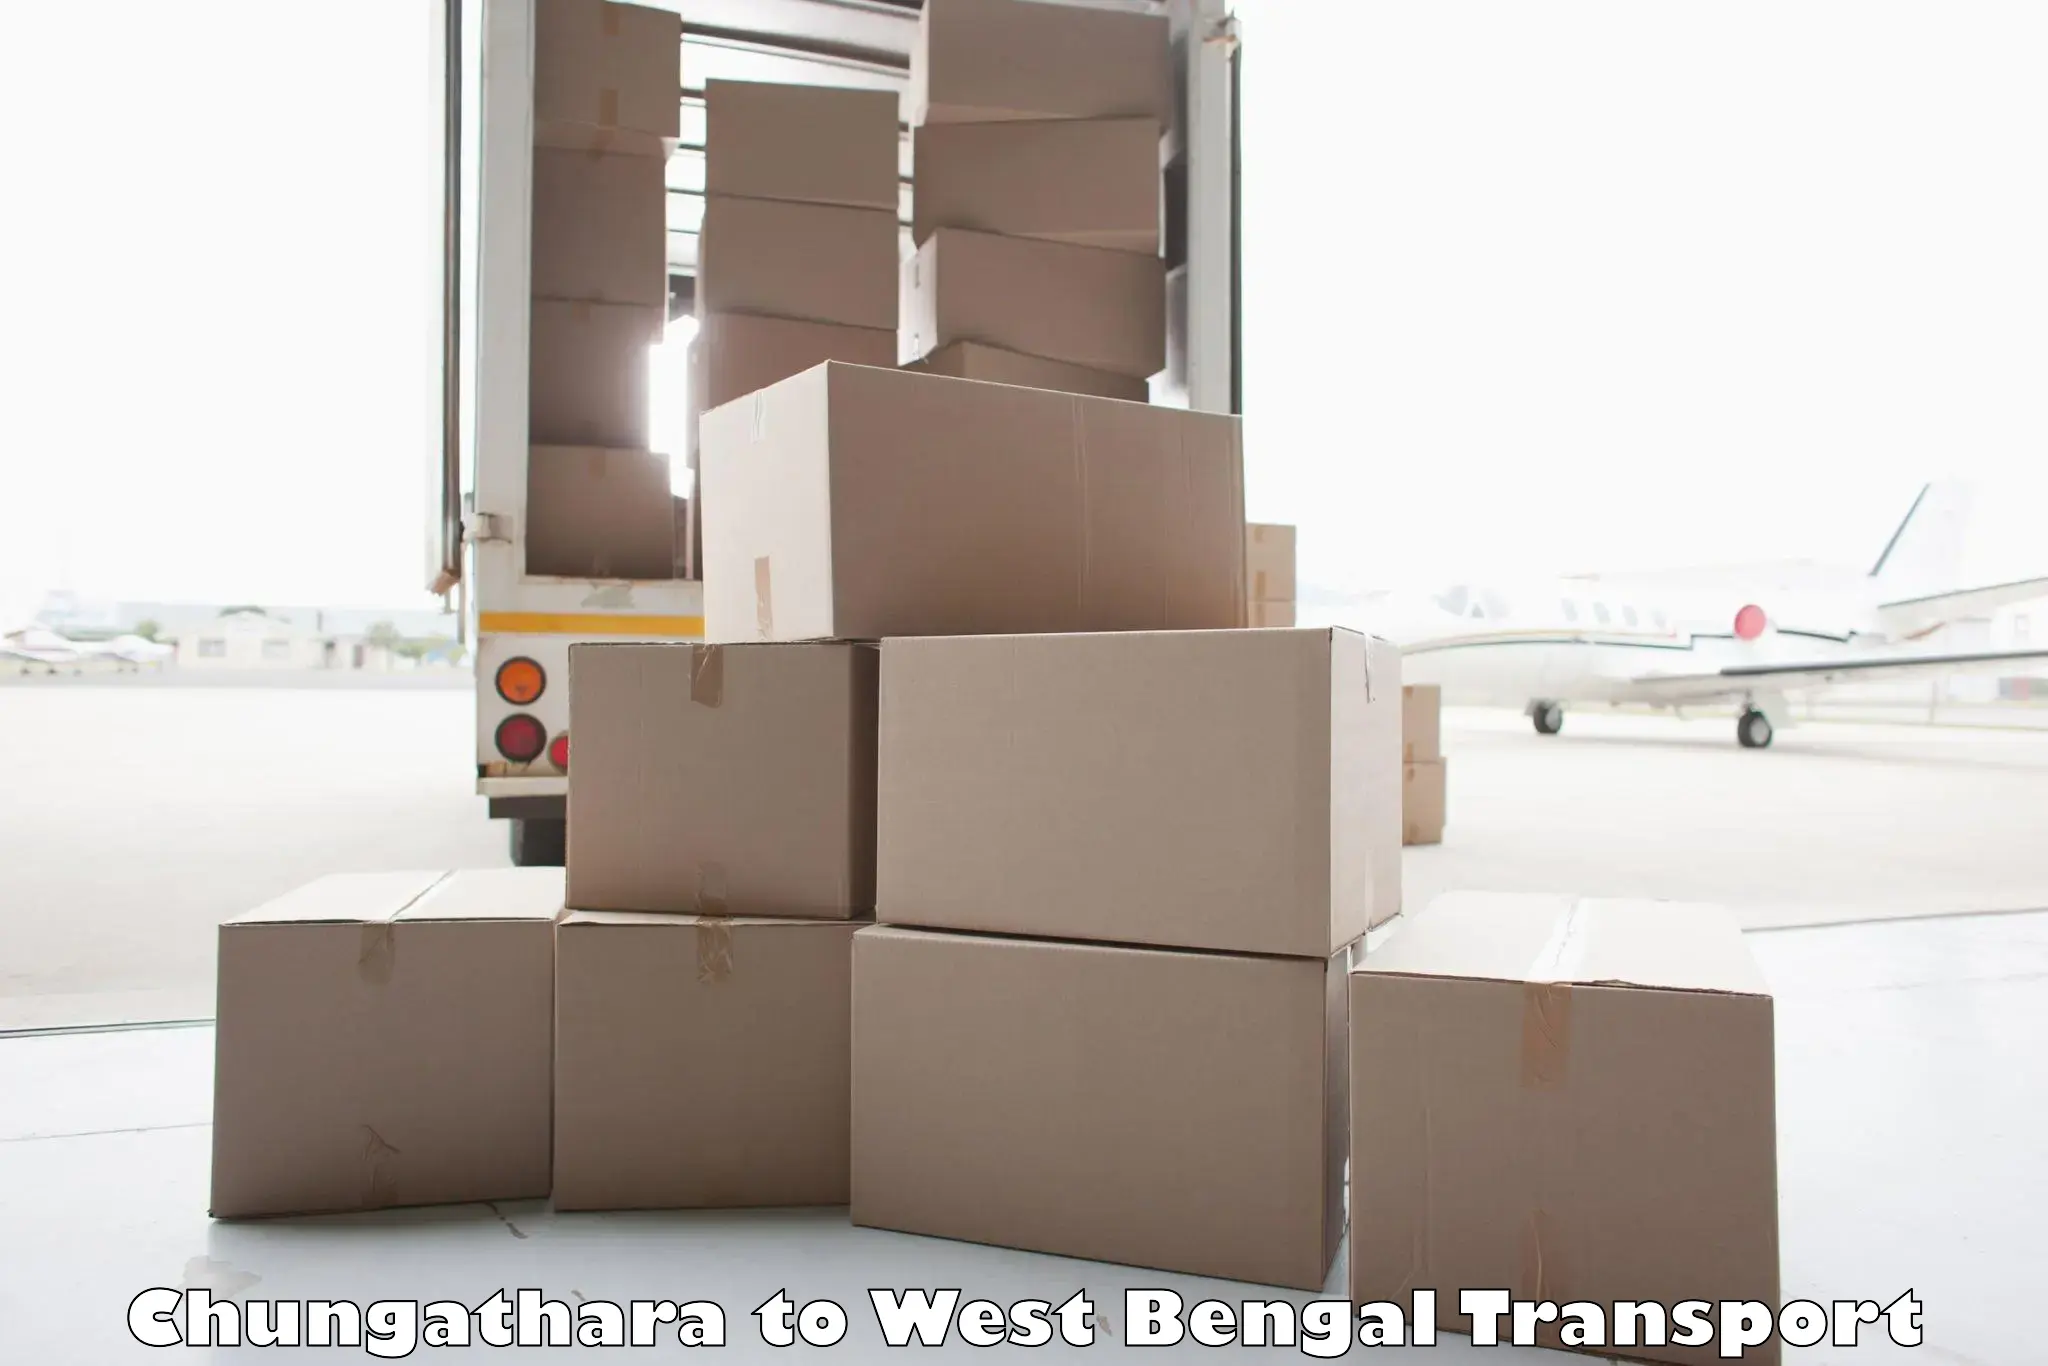 Material transport services in Chungathara to Barasat